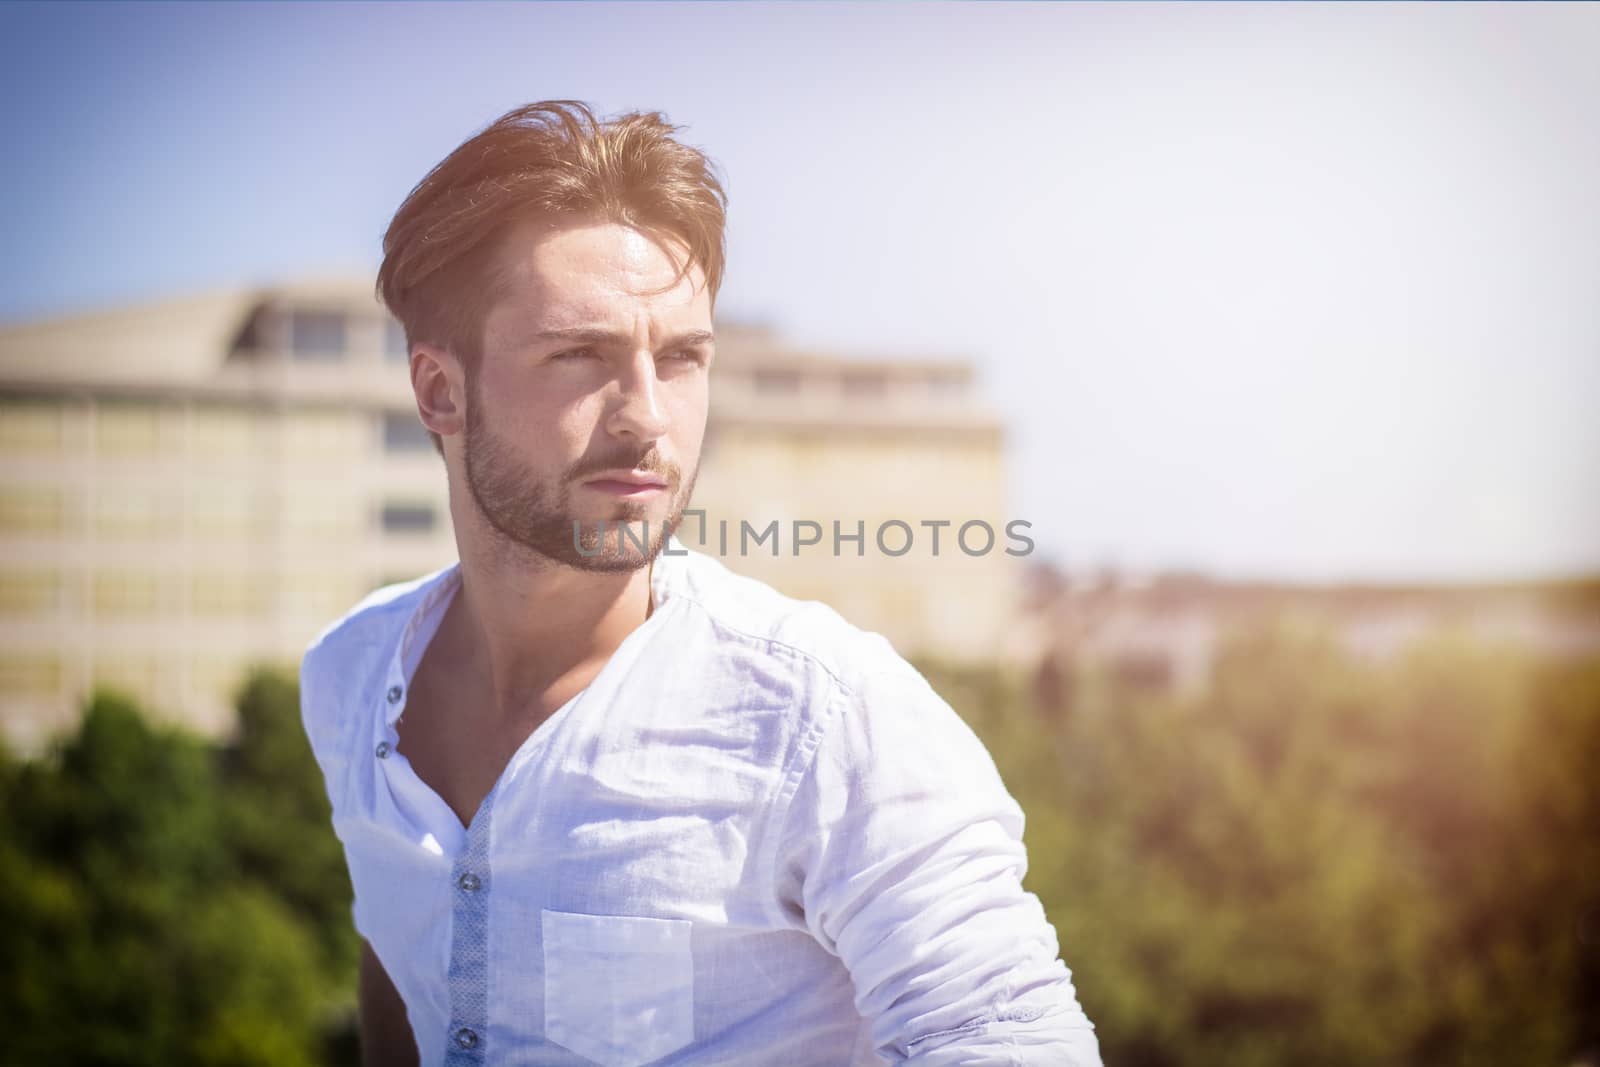 One handsome young man in city setting by artofphoto